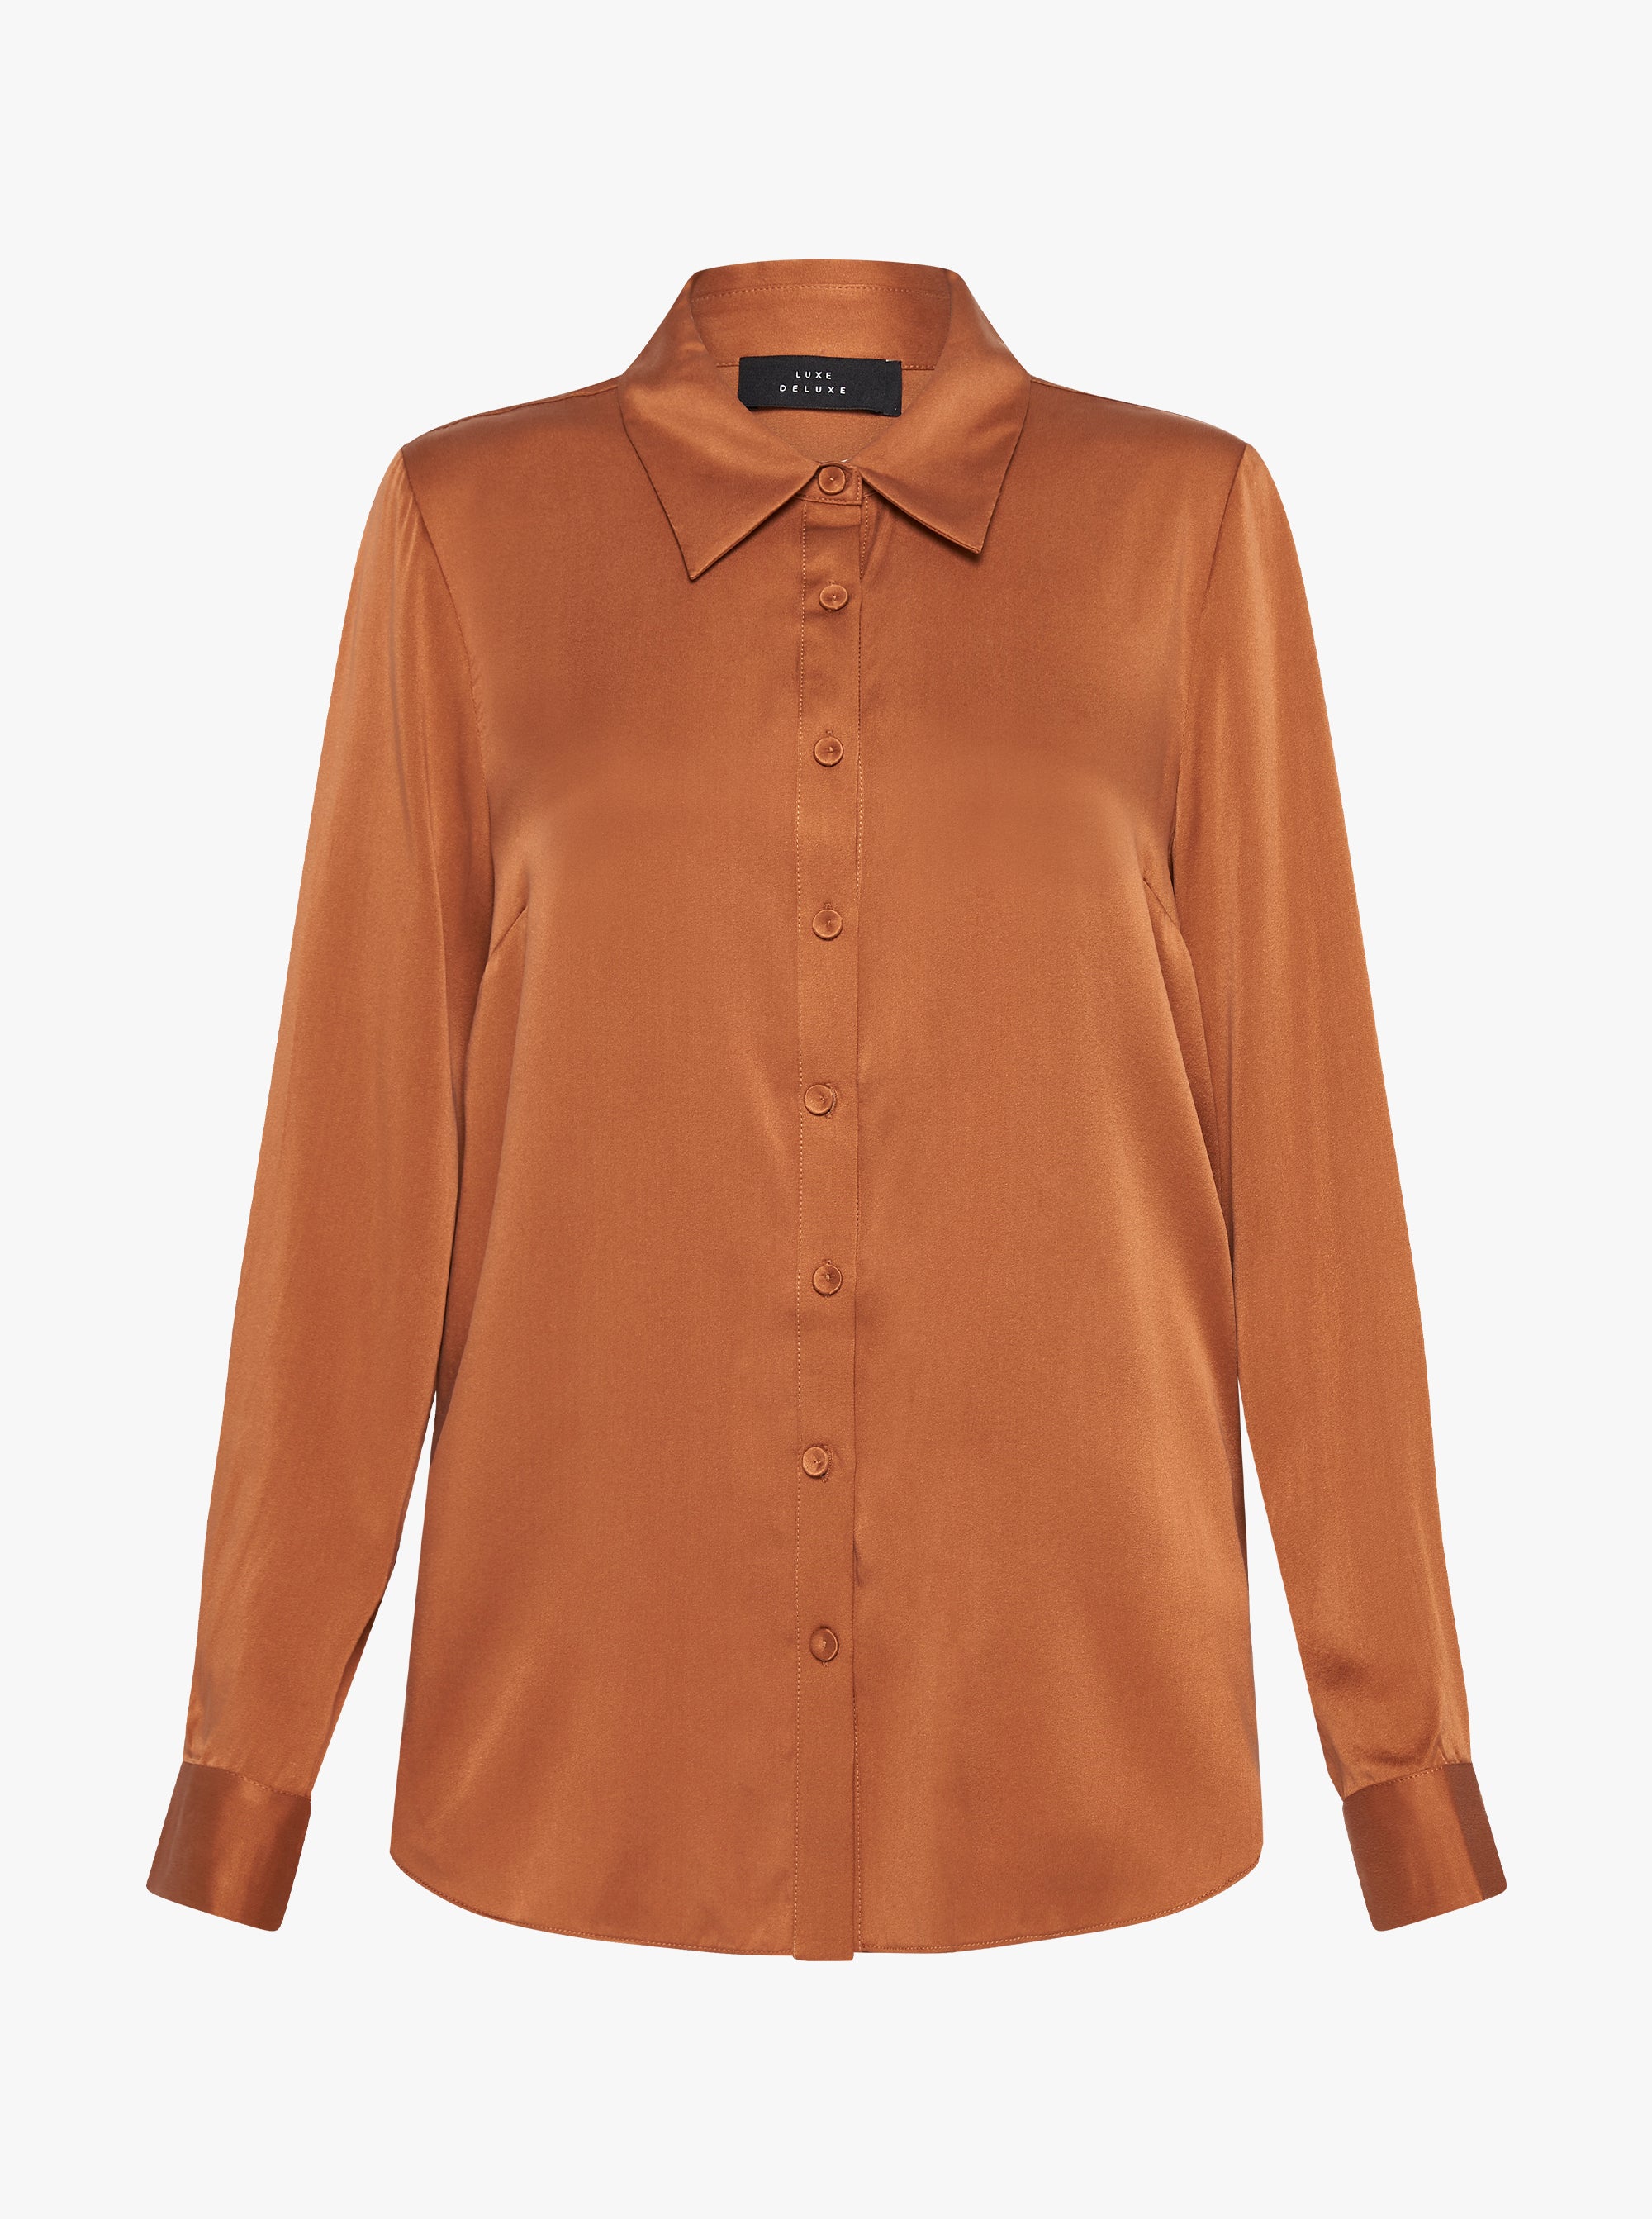 TOPS AND BLOUSES - LUXE DELUXE